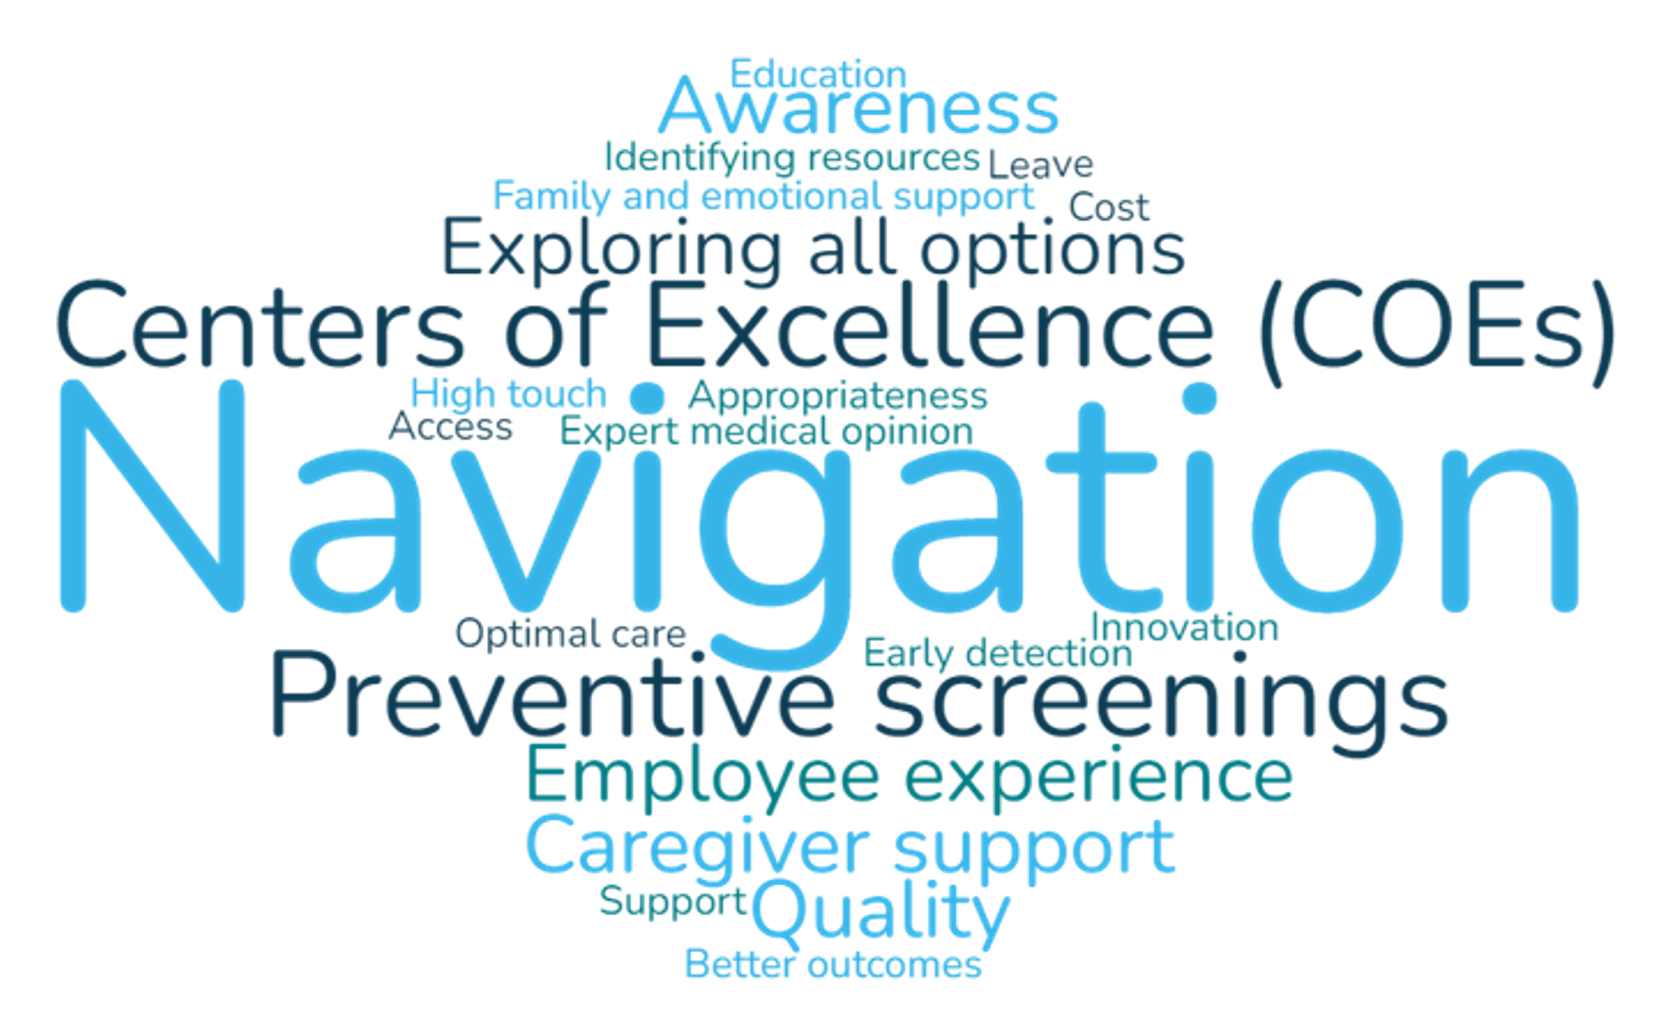 -	Navigation (12) -	Preventive screenings (6) -	Centers of Excellence (COEs) (3) -	Exploring all options (2) -	Quality (2) -	Caregiver support (2) -	Employee experience (2) -	Awareness (2) -	High touch (1) -	Leave (1) -	Education (1) -	Early detection (1) -	Family and emotional support (1) -	Better outcomes (1)  -	Optimal care (1) -	Appropriateness (1) -	Access (1)  -	Innovation (1) -	Support (1) -	Cost (1) -	Identifying resources (1)  -	Expert medical opinion (1)